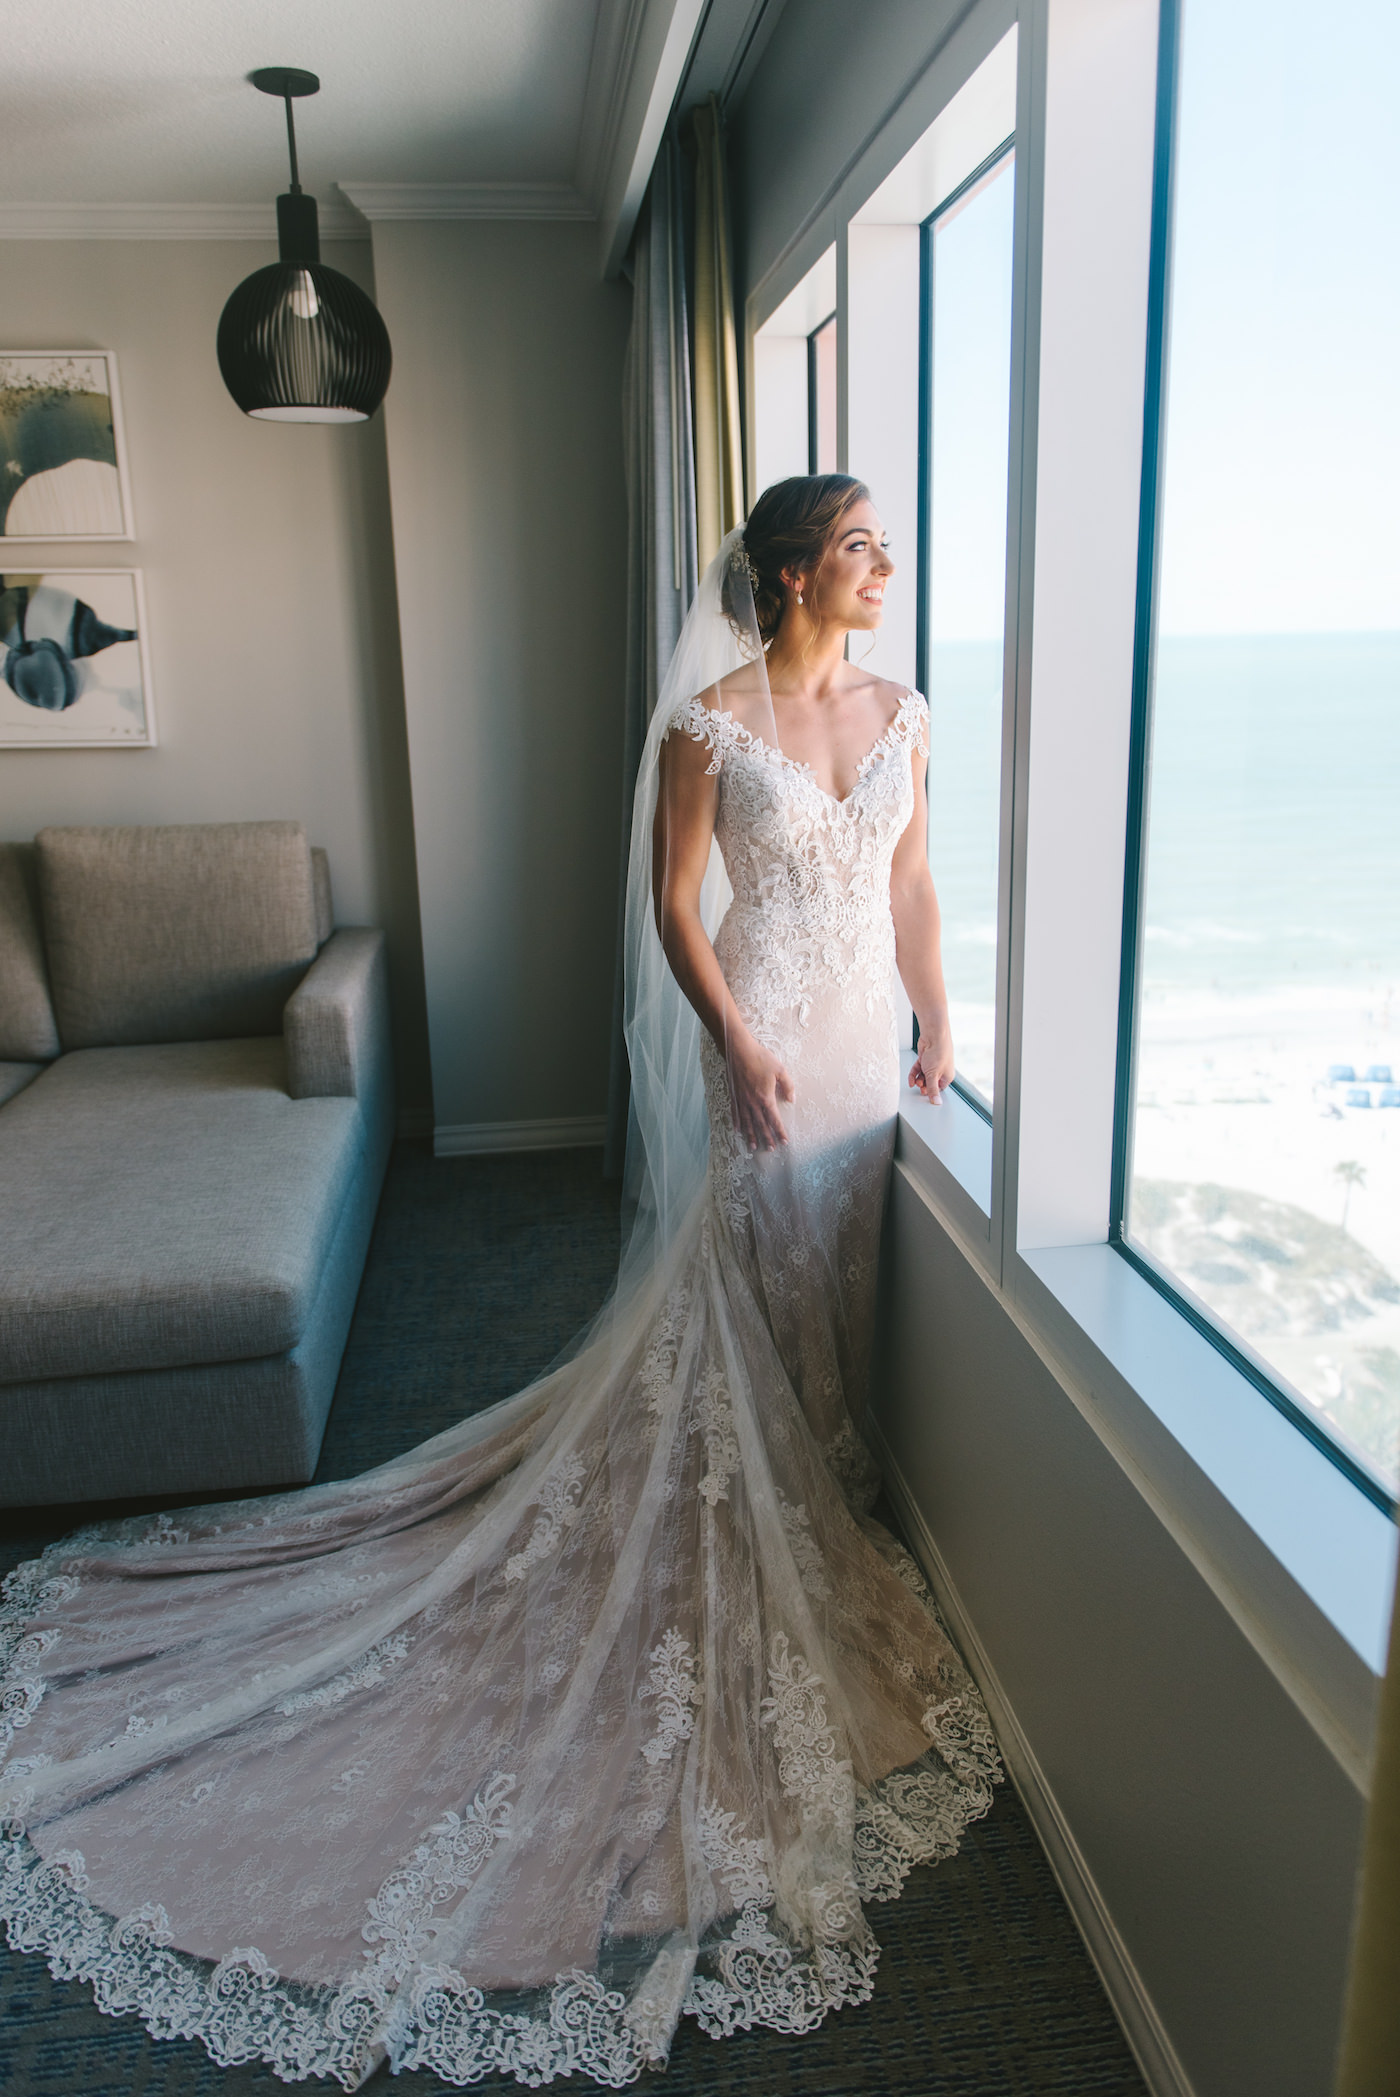 Ivory and Champagne Lilian West Sheath Wedding Dress Bridal Gown with V Neck Off The Shoulder Straps, Scalloped Edge Train and Long Cathedral Veil | Tampa Bay Wedding Photographer Kera Photography